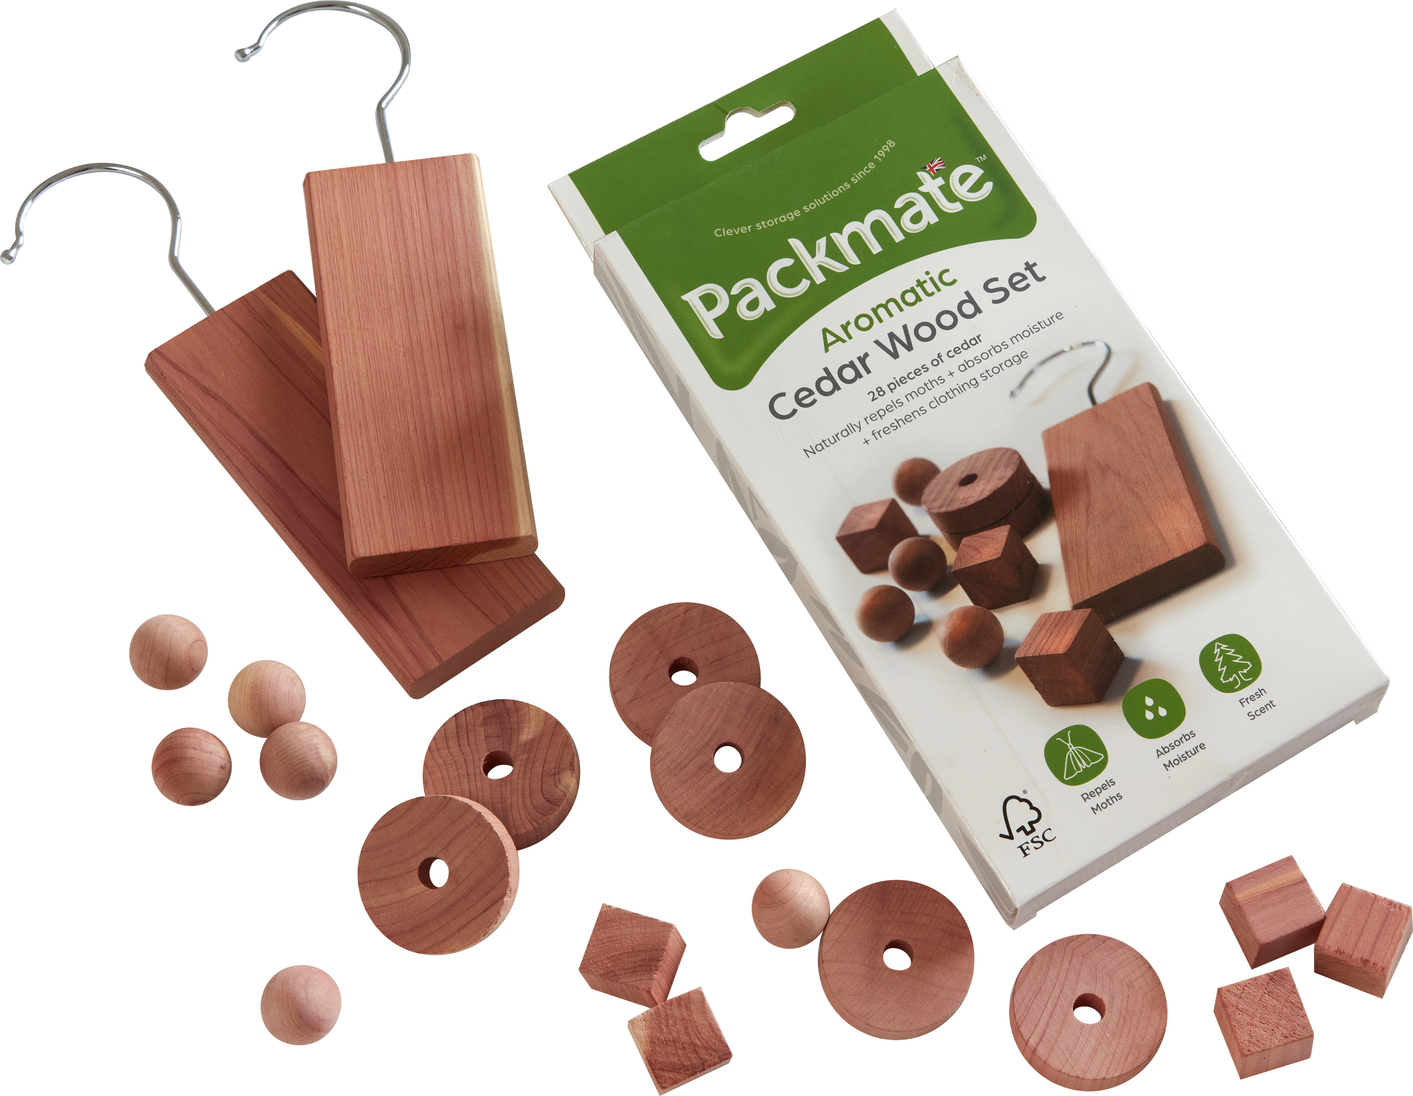 Packmate 28pc Aromatic Cedar Wood Set